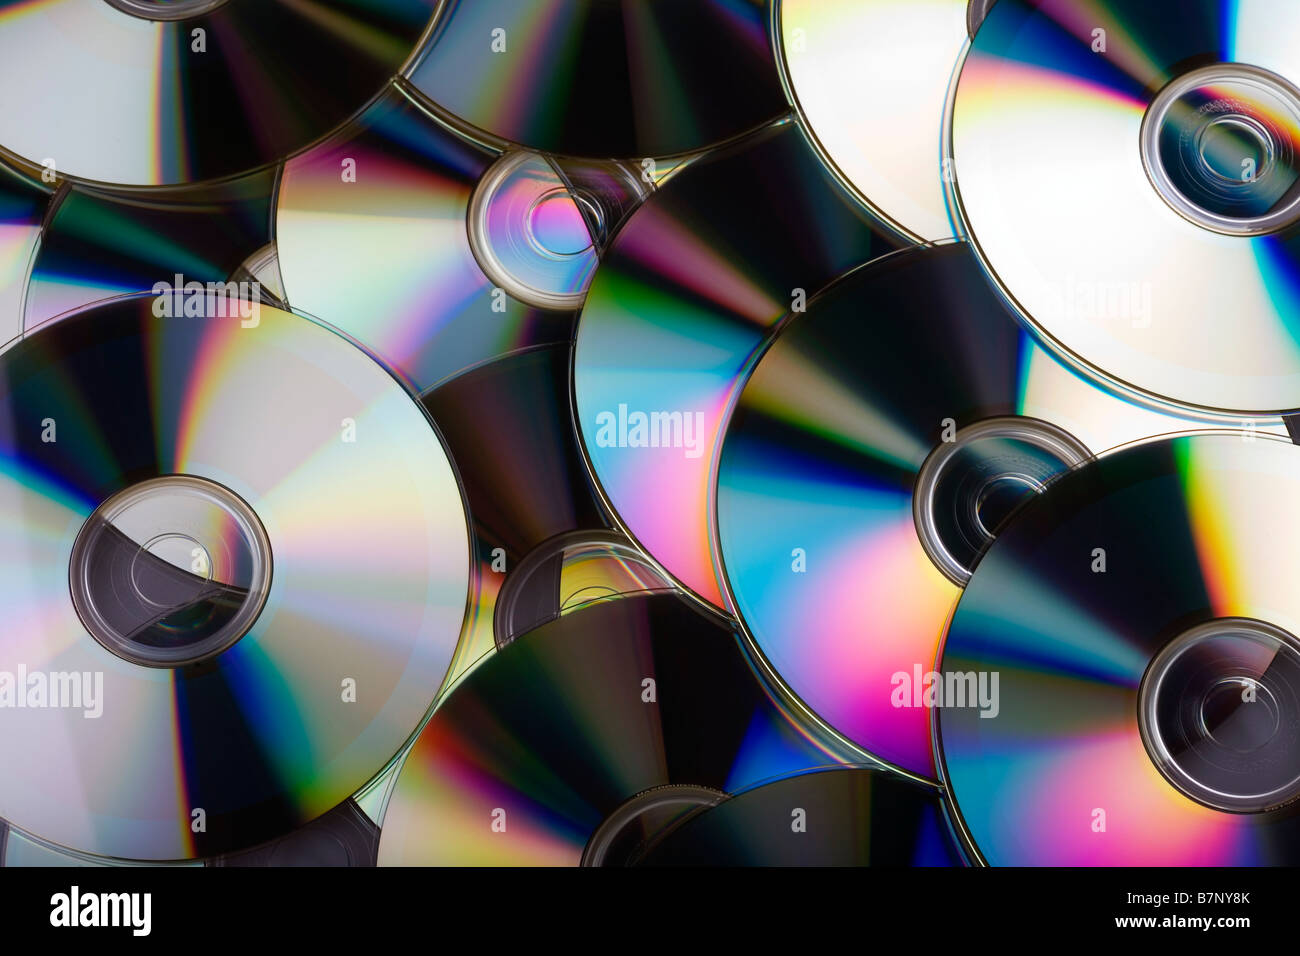 Multiple compact disks overlapping each other creating a colourful display Stock Photo